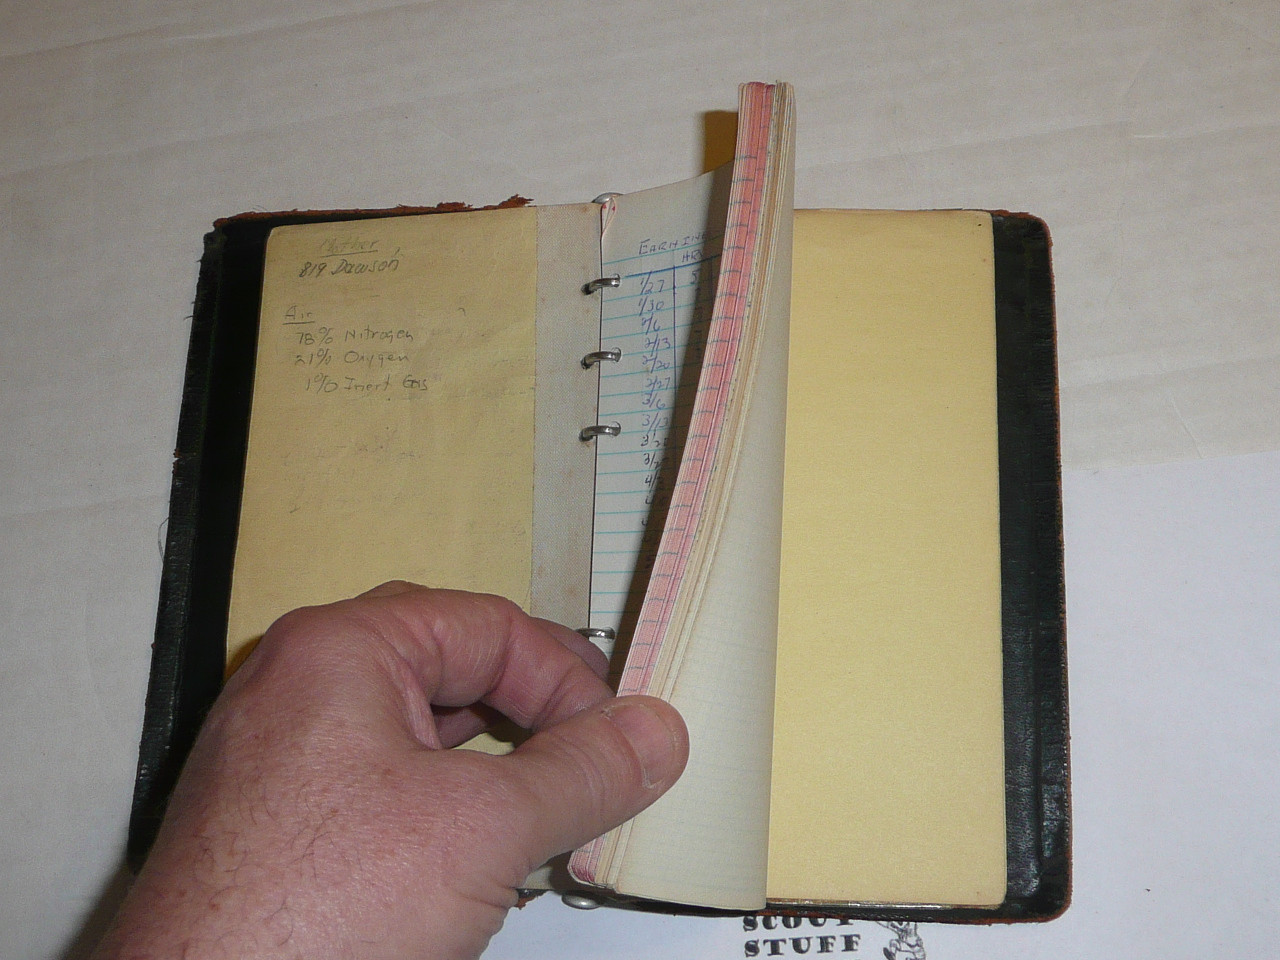 Lefax Boy Scout Fieldbook, Leather Binding, Considerable wear, Includes many lined and blank Lefax Pages